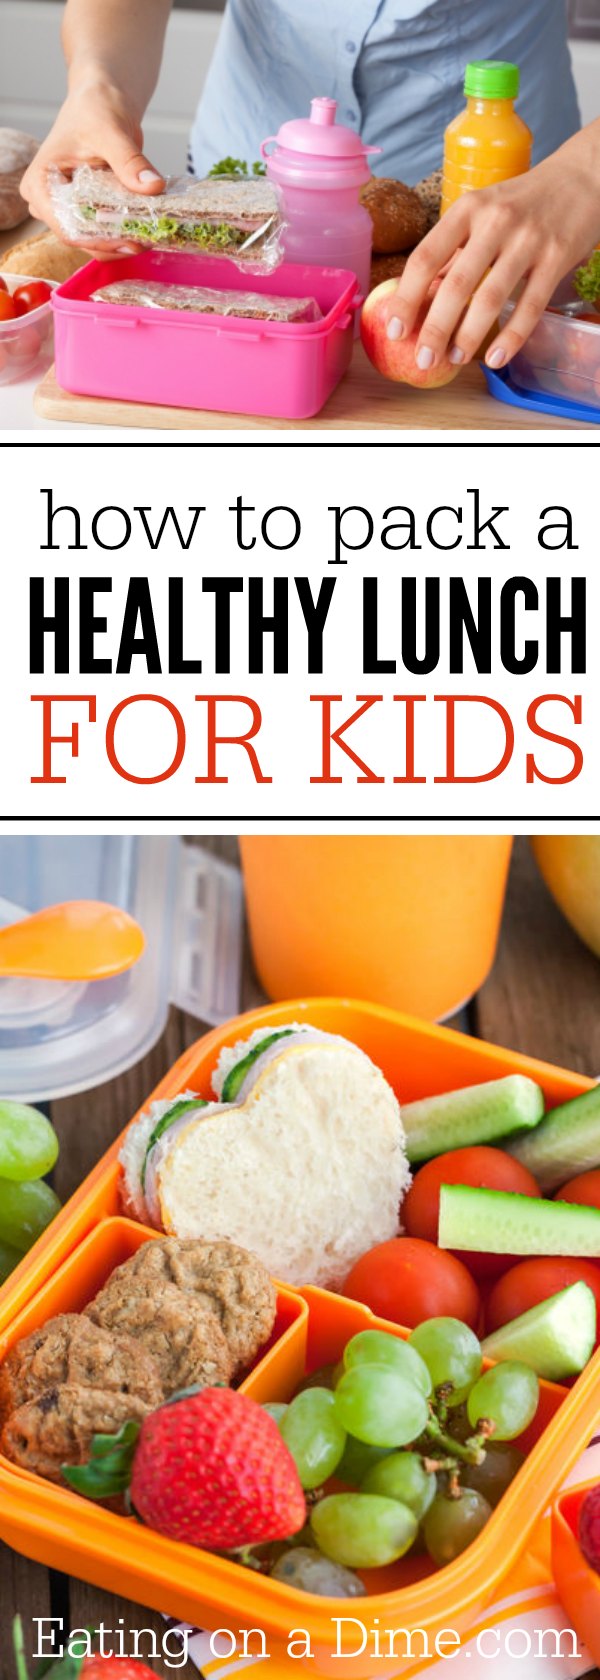 How to pack healthy lunches for kids quickly. Here are simple tips on how to pack healthy lunches ideas that kids will love. 